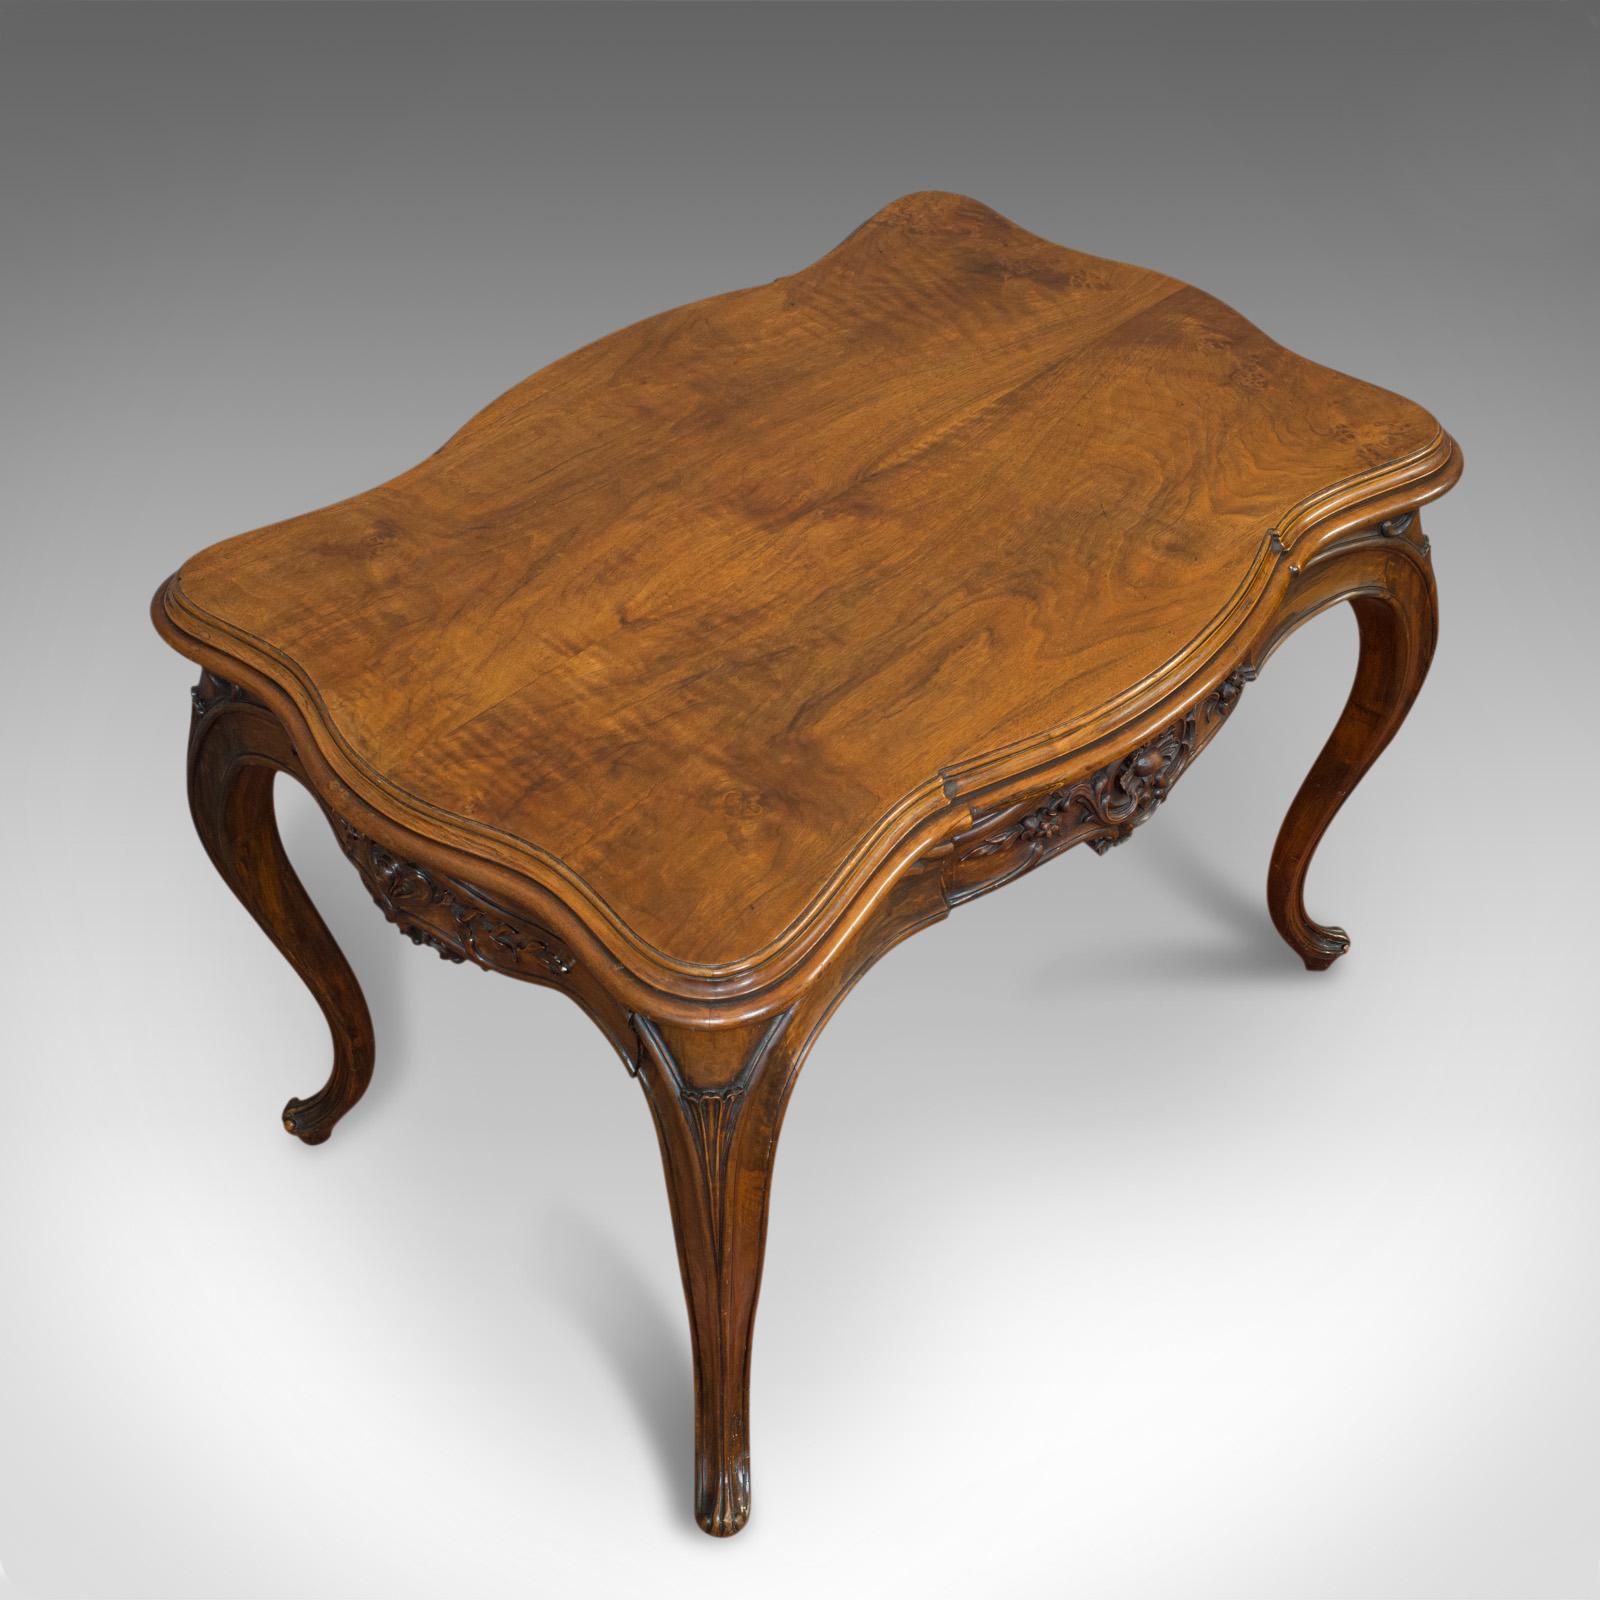 Antique Centre Table, French, Walnut, Serpentine, Occasional, Louis XV Taste 2